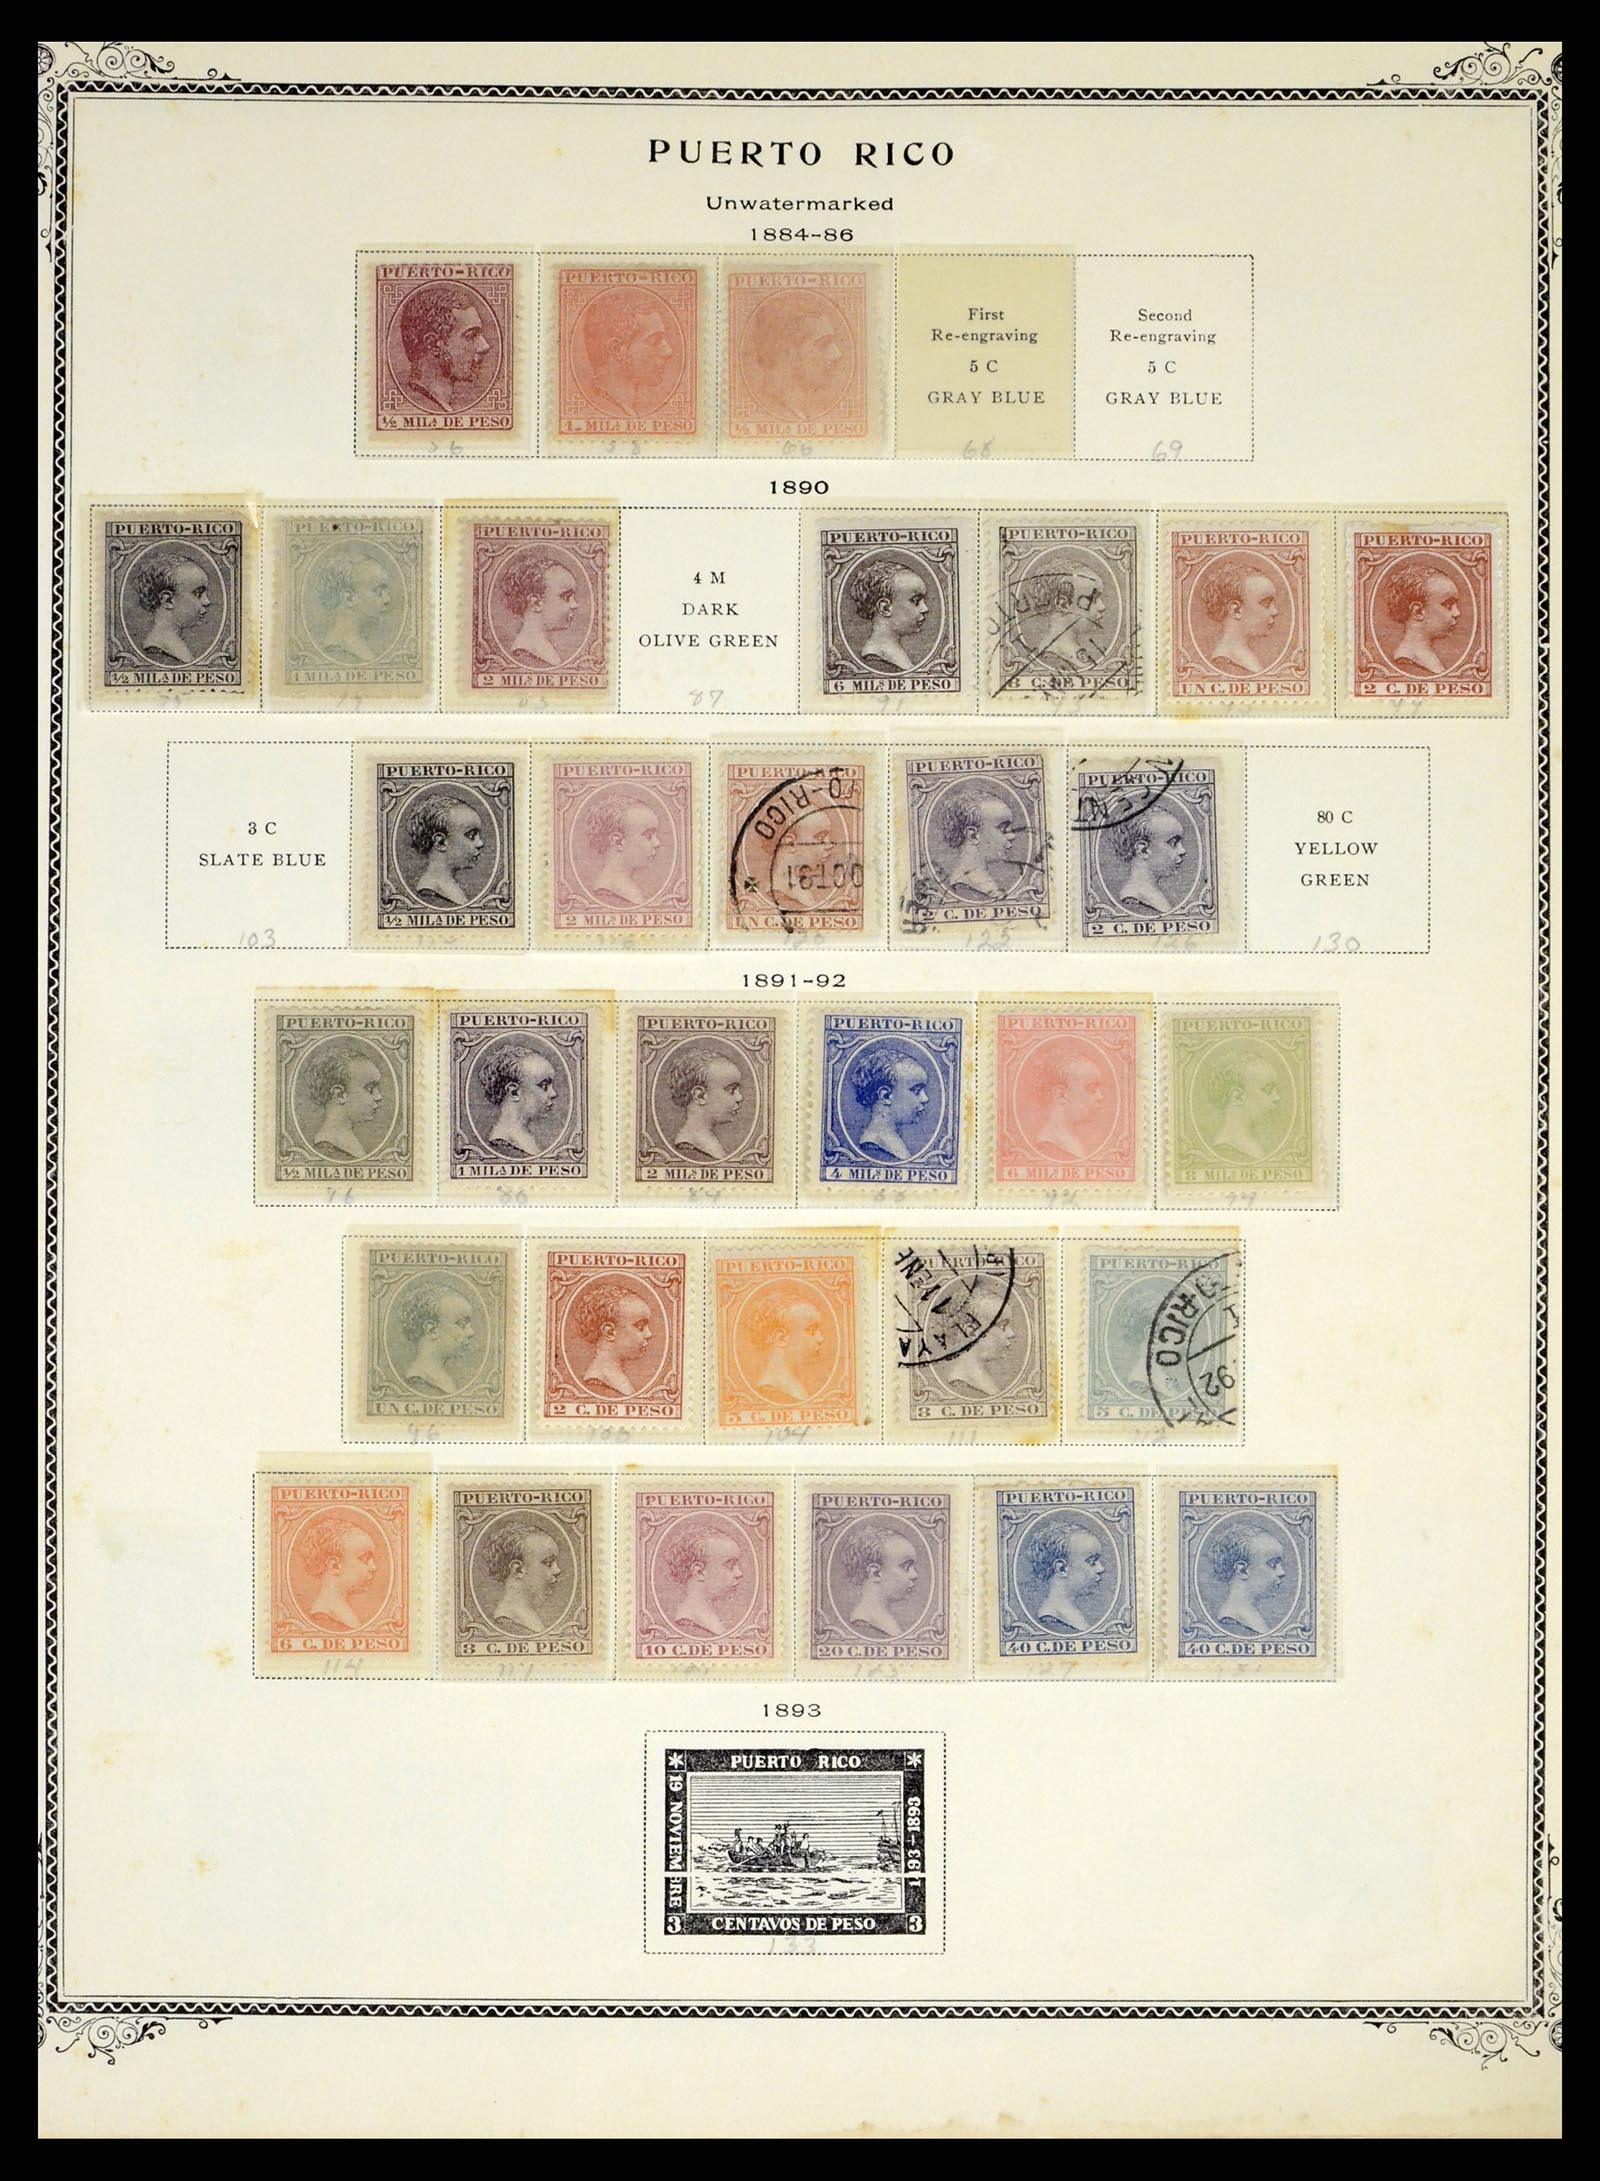 38191 0032 - Stamp collection 38191 Puerto Rico 1855-1900.